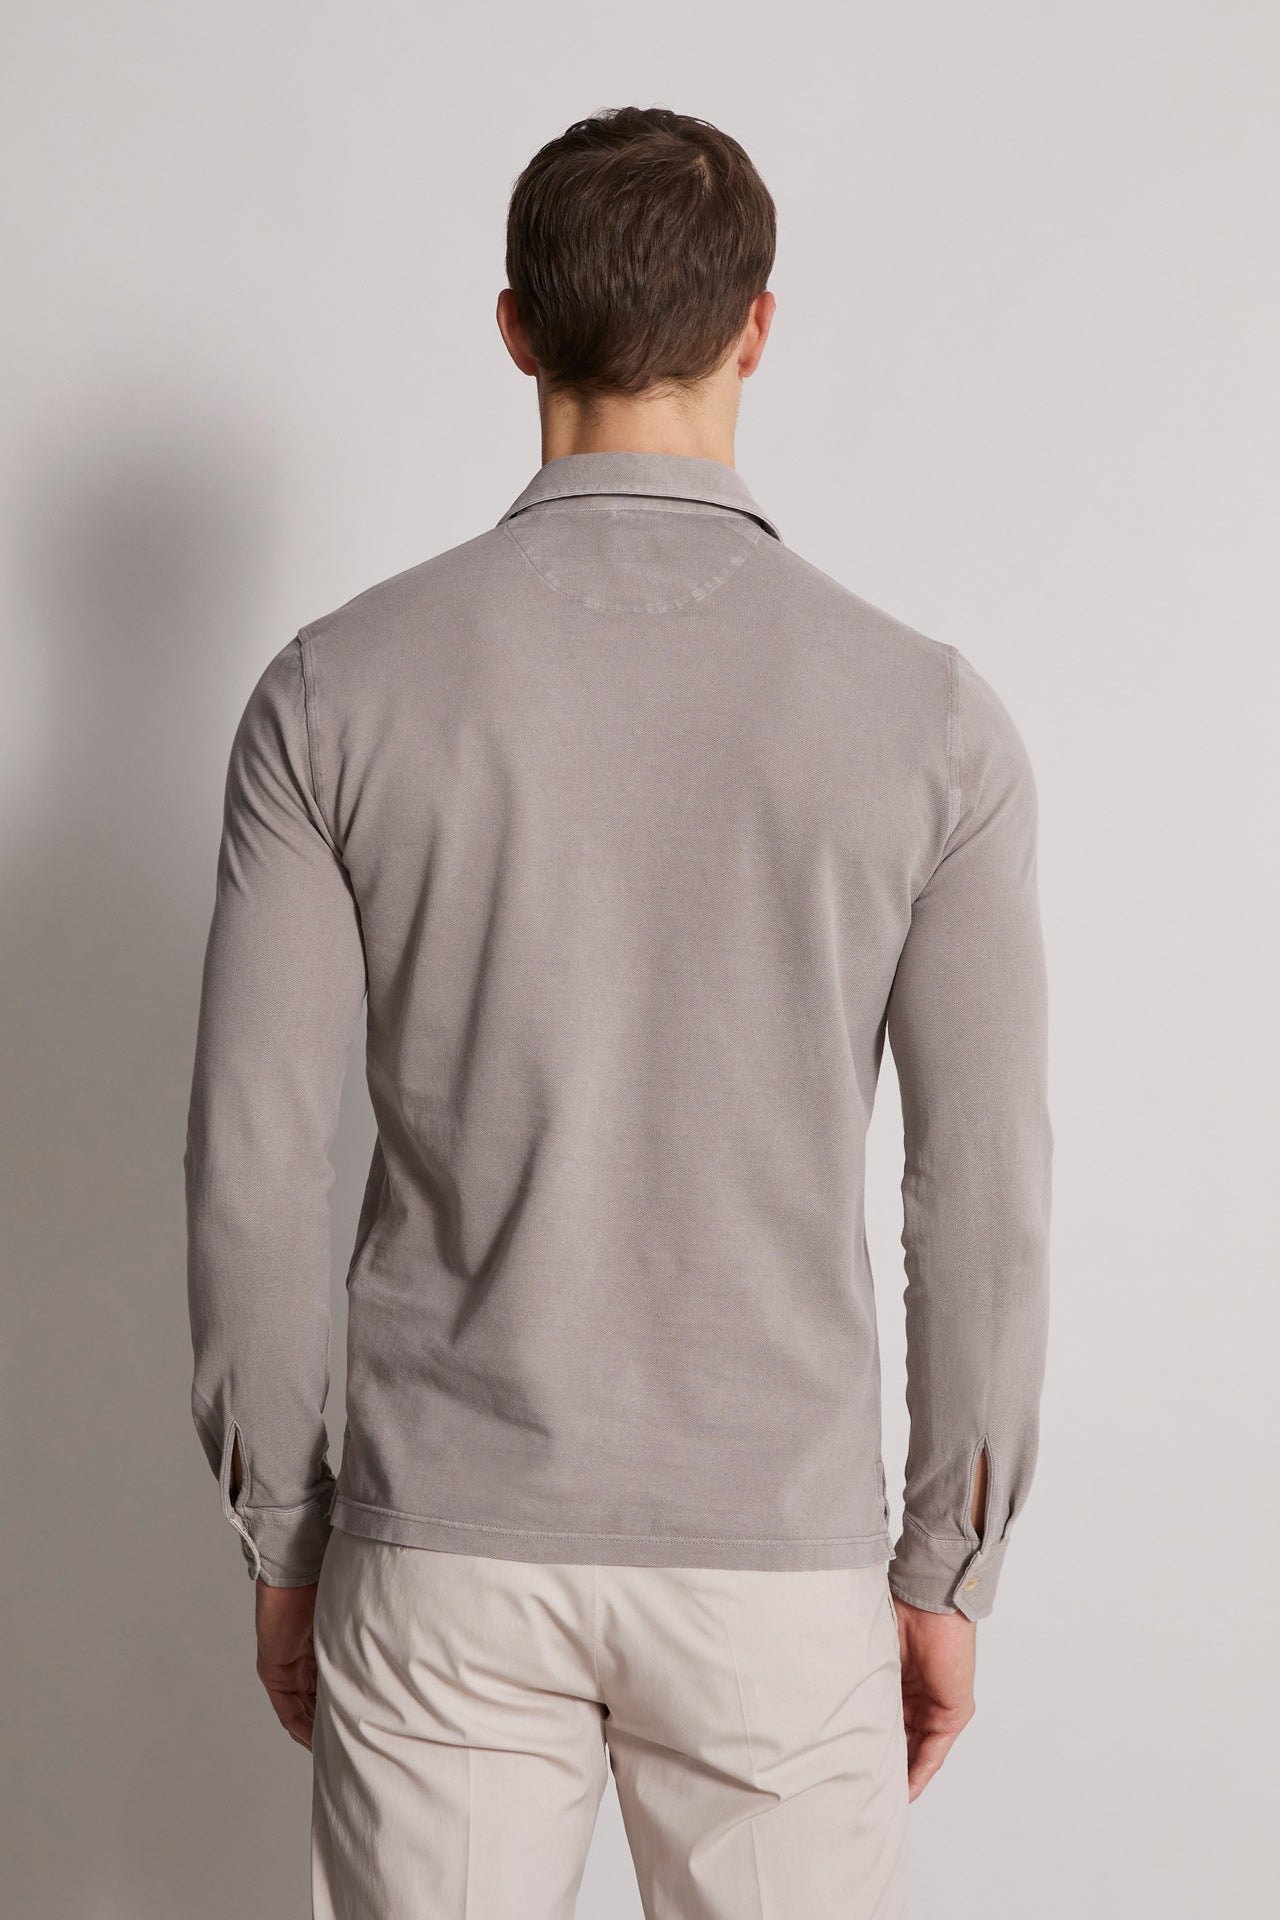 long sleeved cotton polo in grey-beige - back view